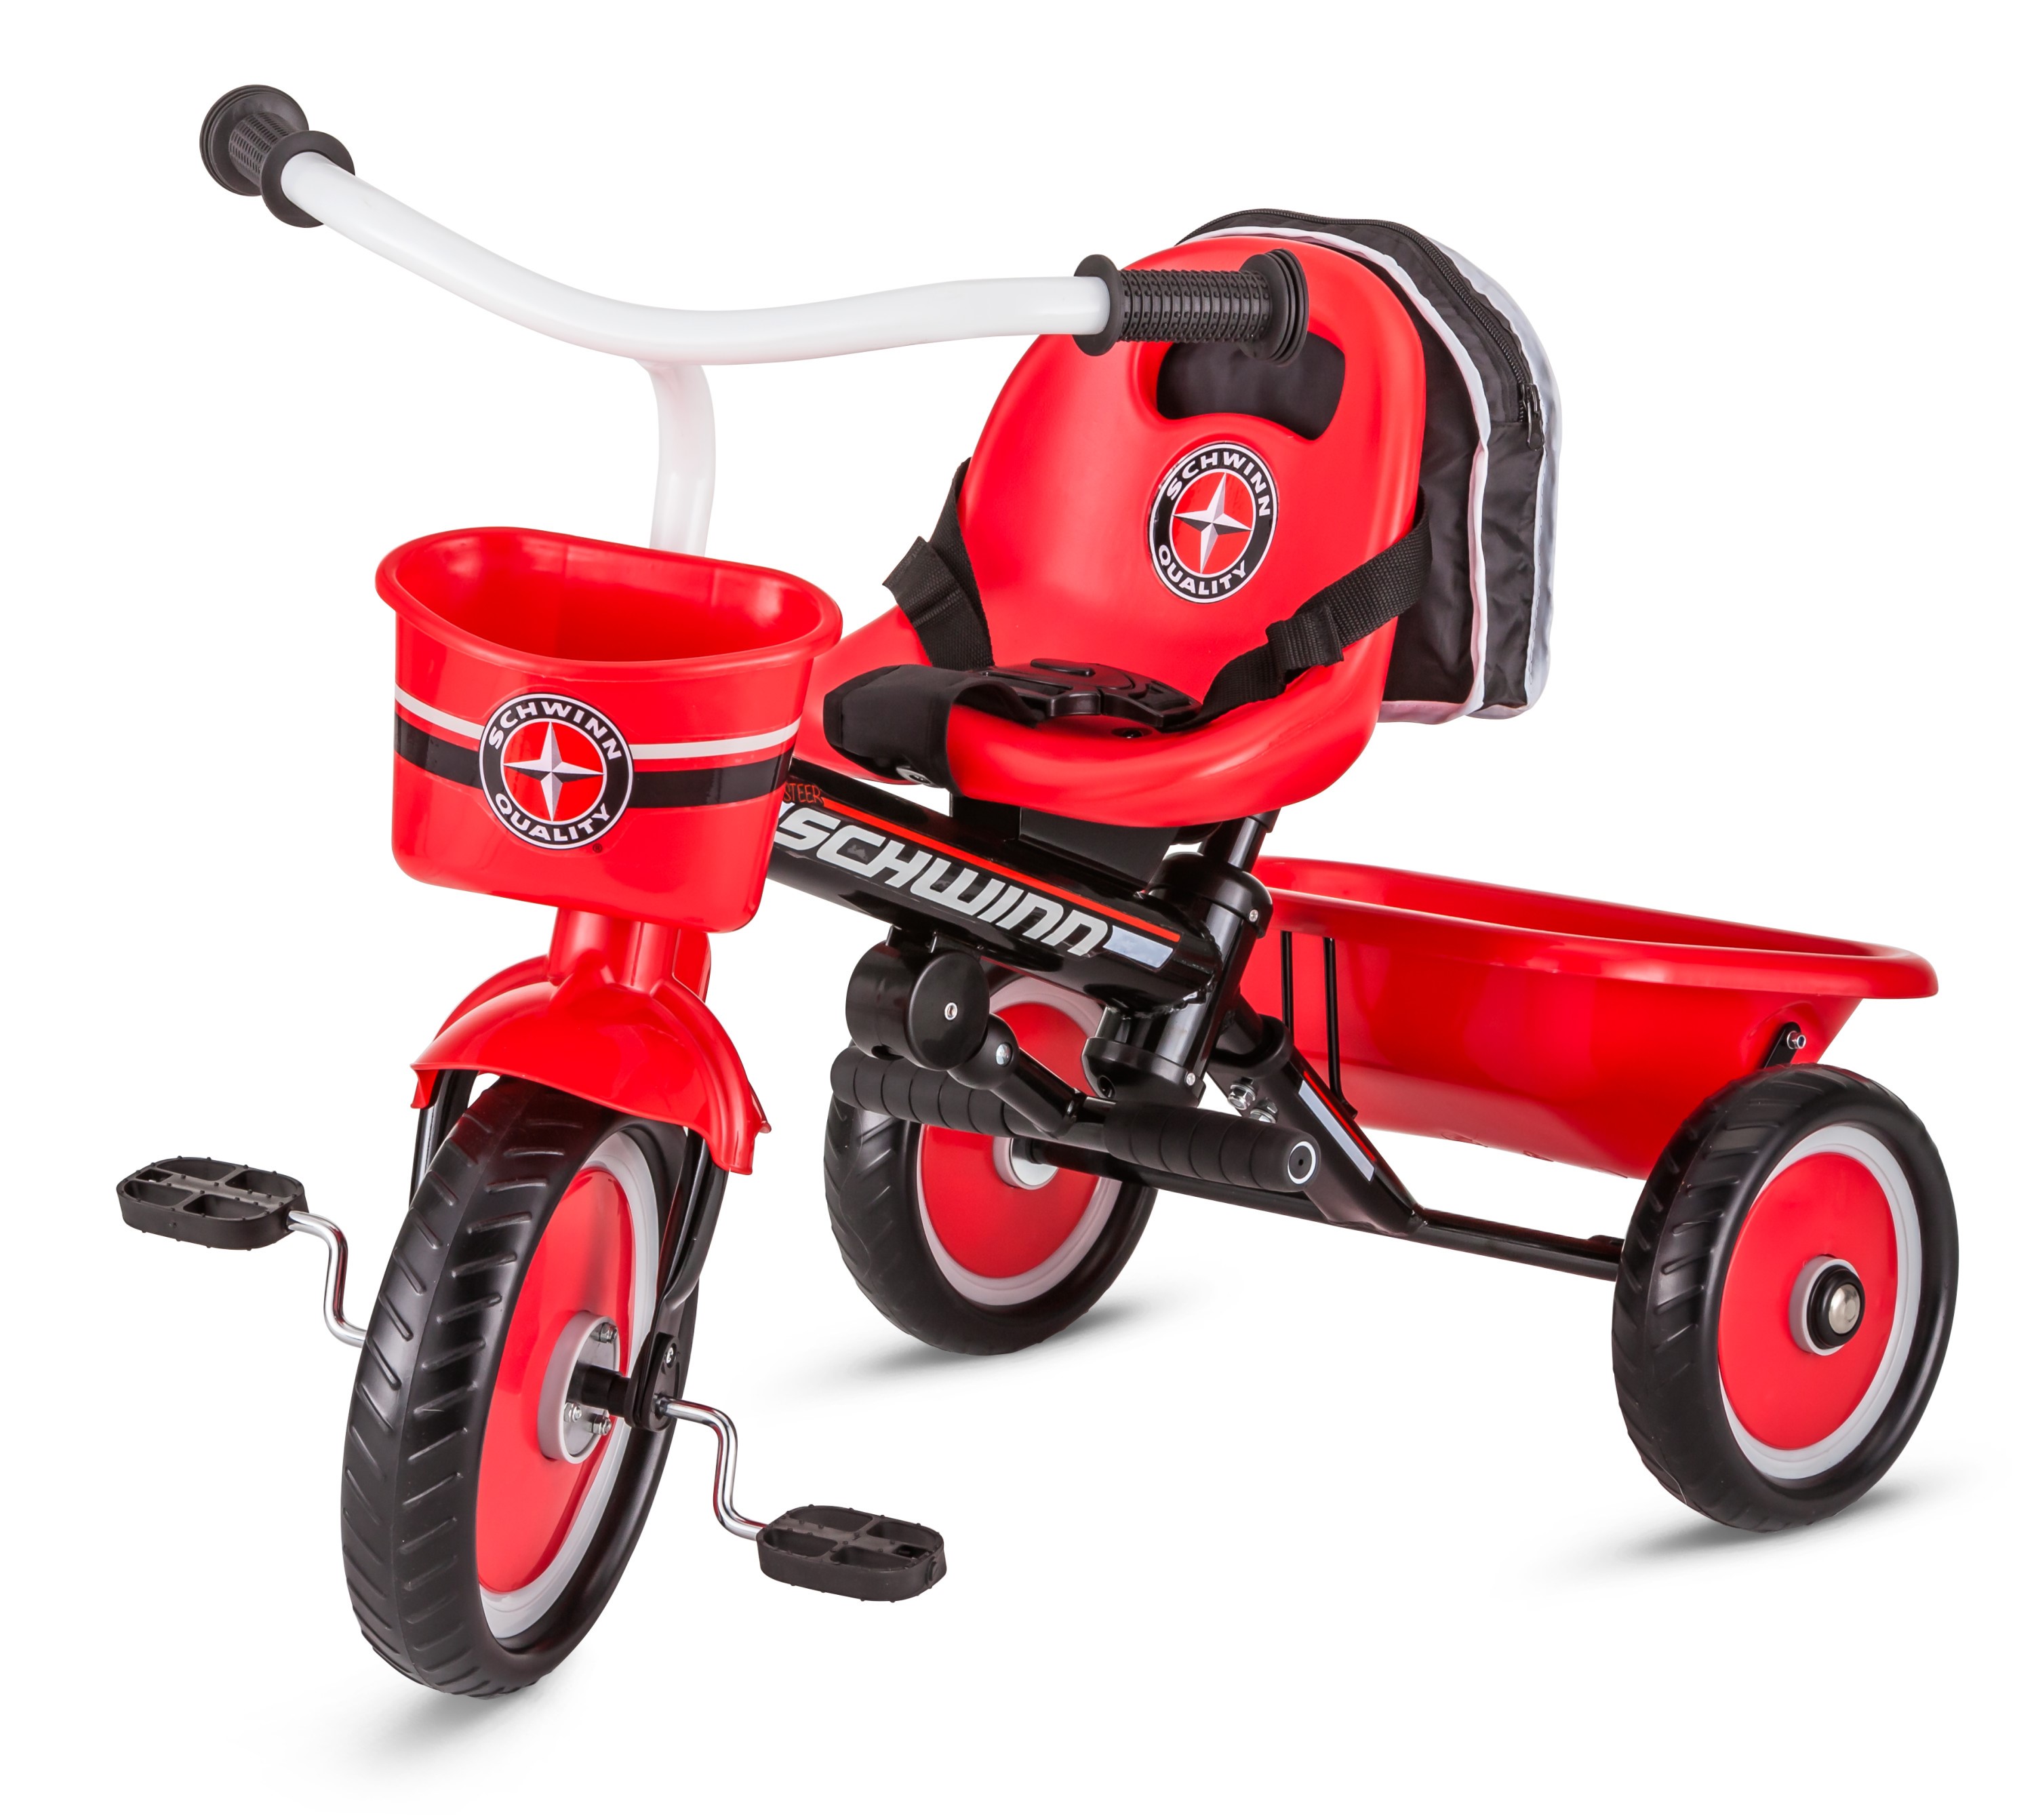 Schwinn Easy-Steer Tricycle with Push/Steer Handle, ages 2 - 4, red & white, toddler bike - image 1 of 9